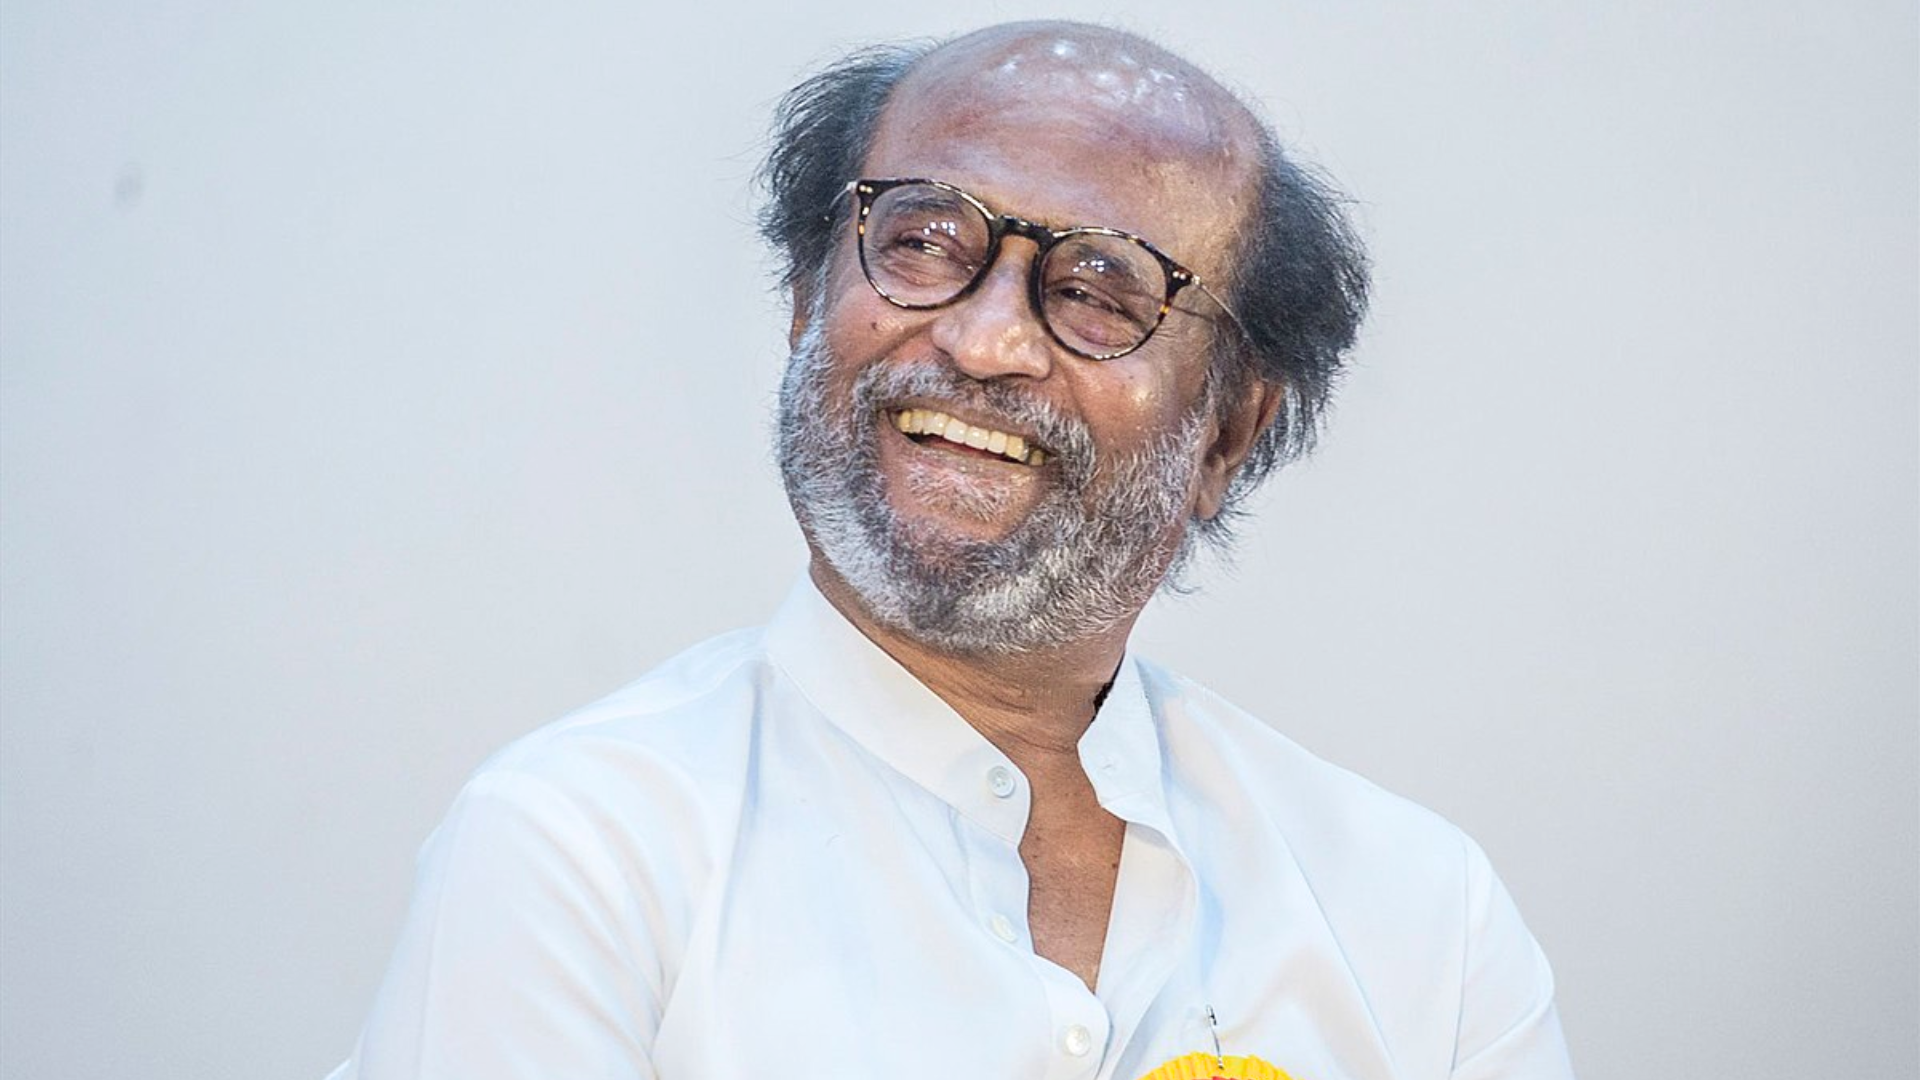 Rajinikanth Gets Candid On Upcoming Elections: “I am Even Afraid To Breathe”